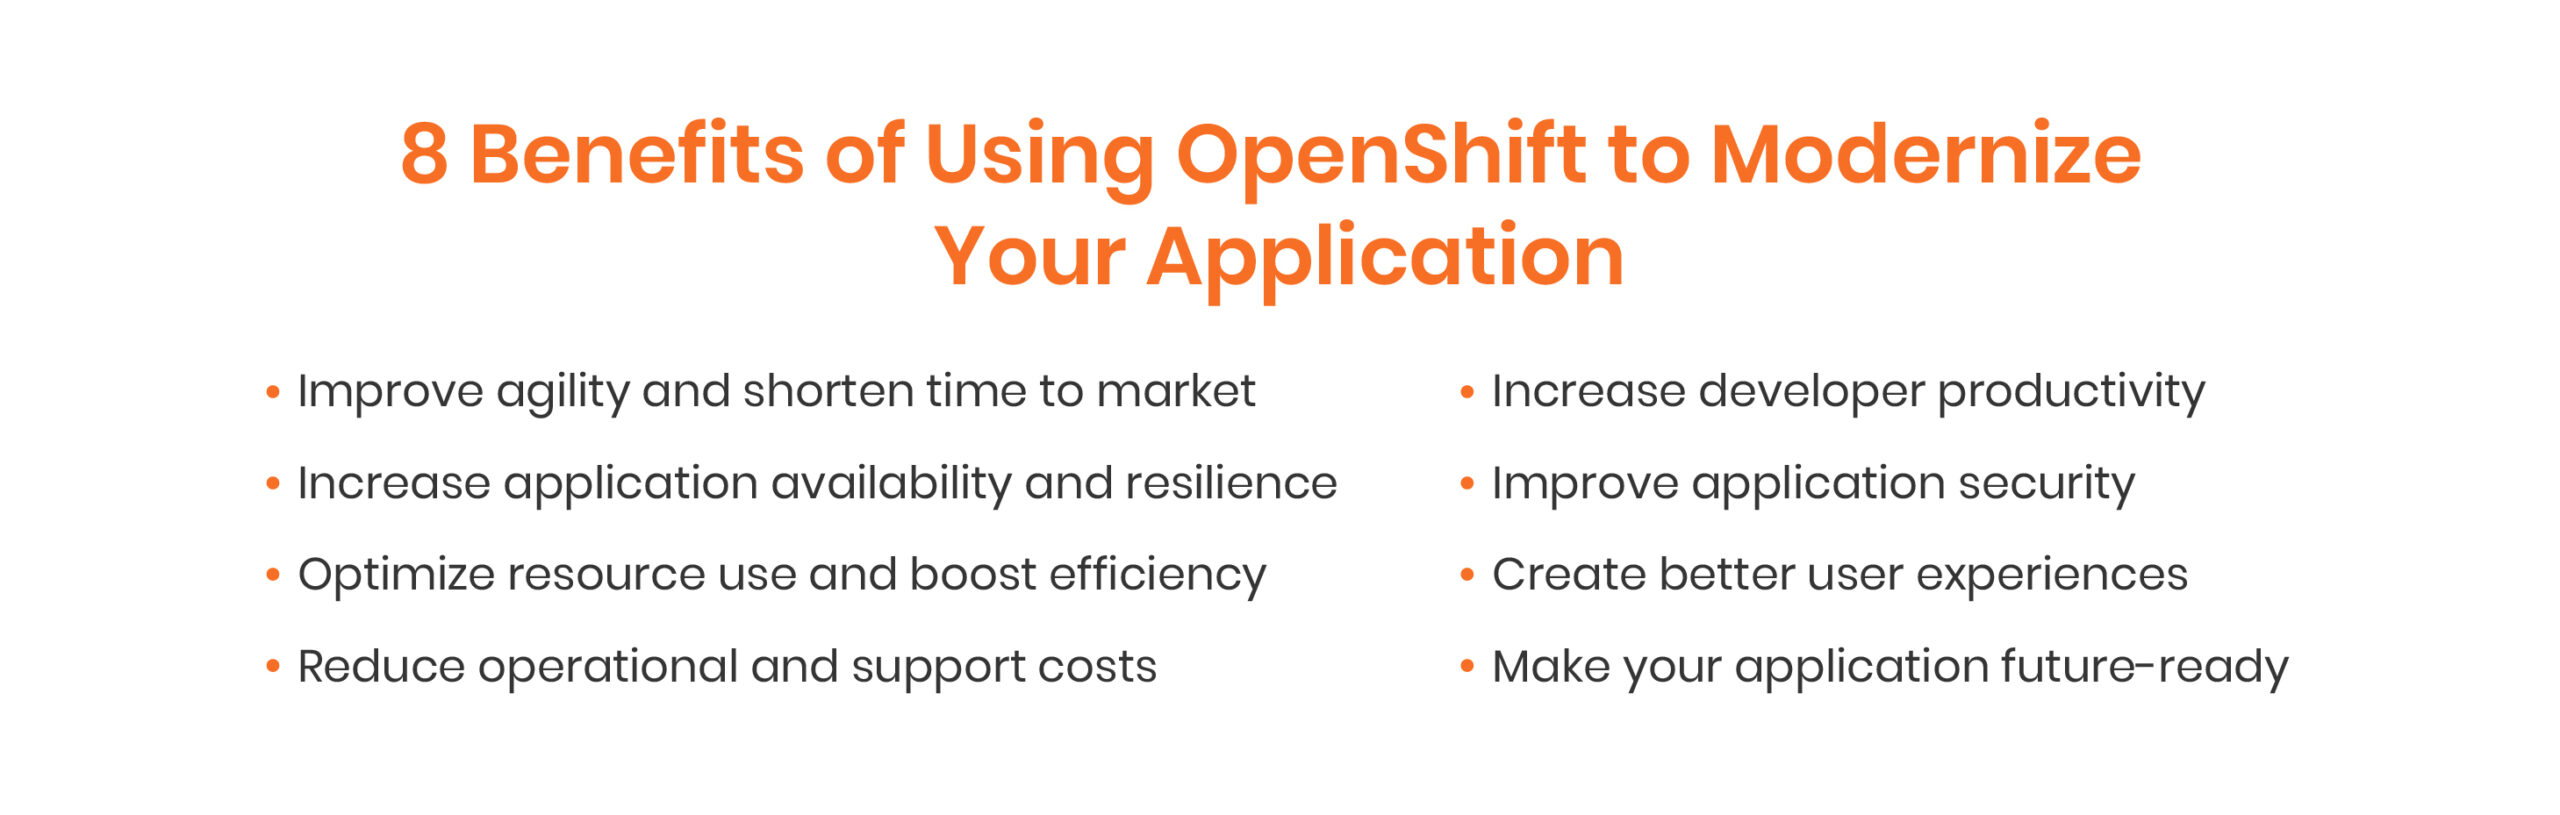 8 Benefits of Using OpenShift to Modernize Your Application